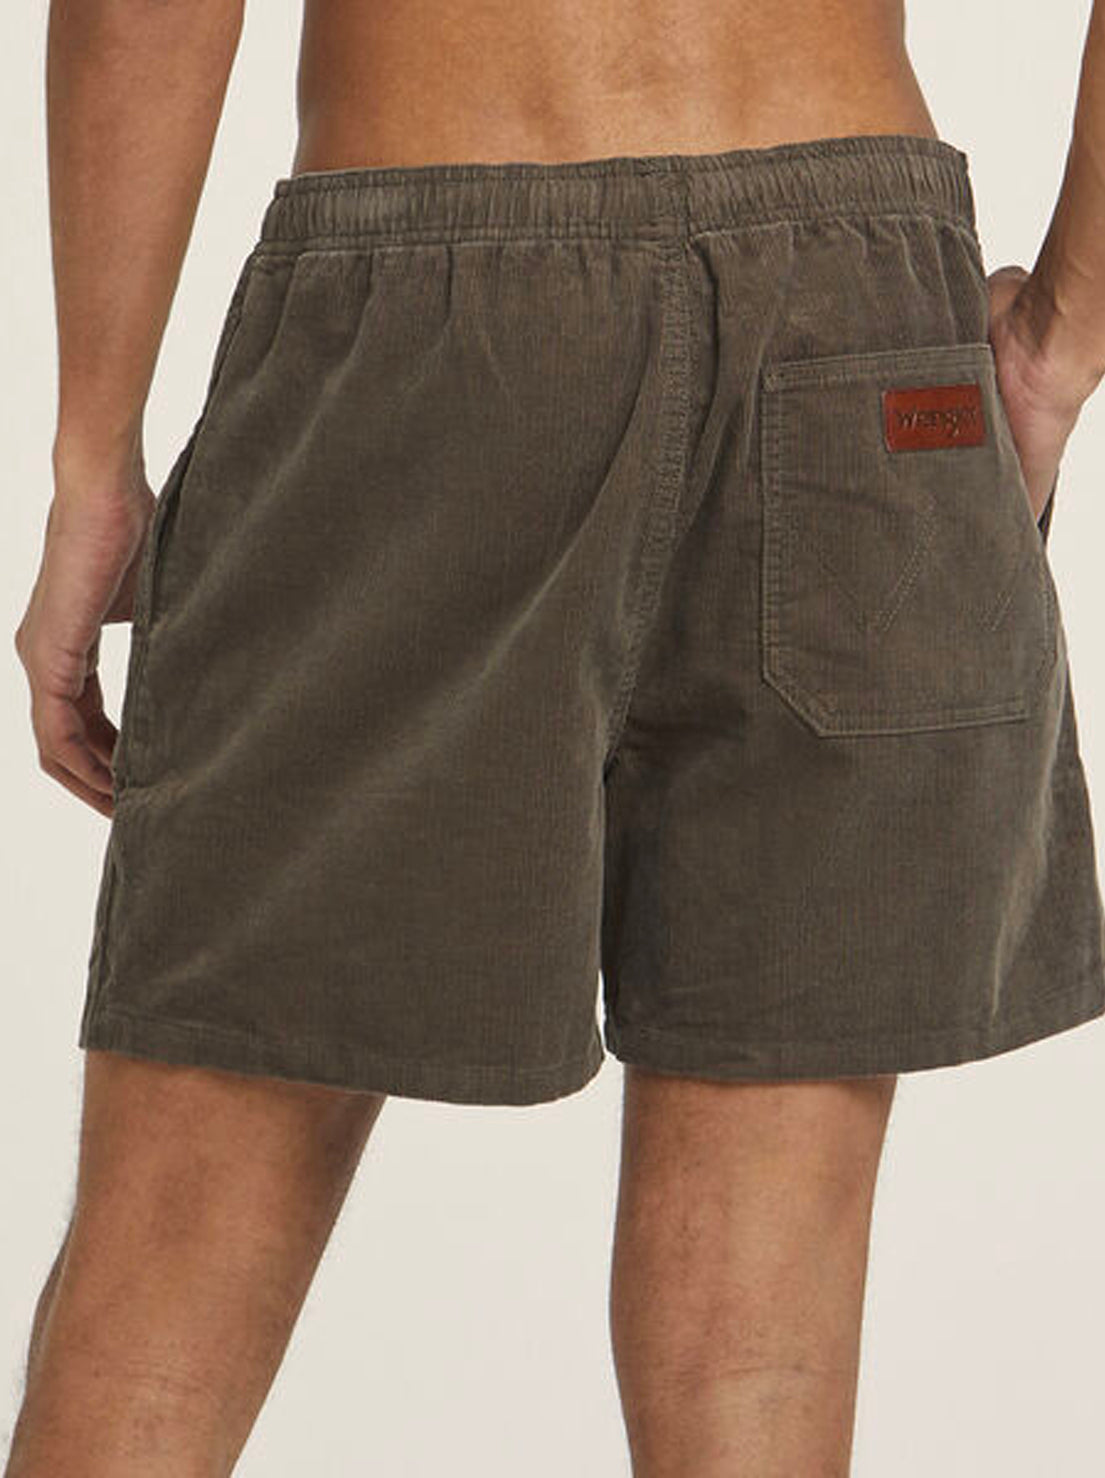 Wrangler - Roomie Short - Pacific Oyster